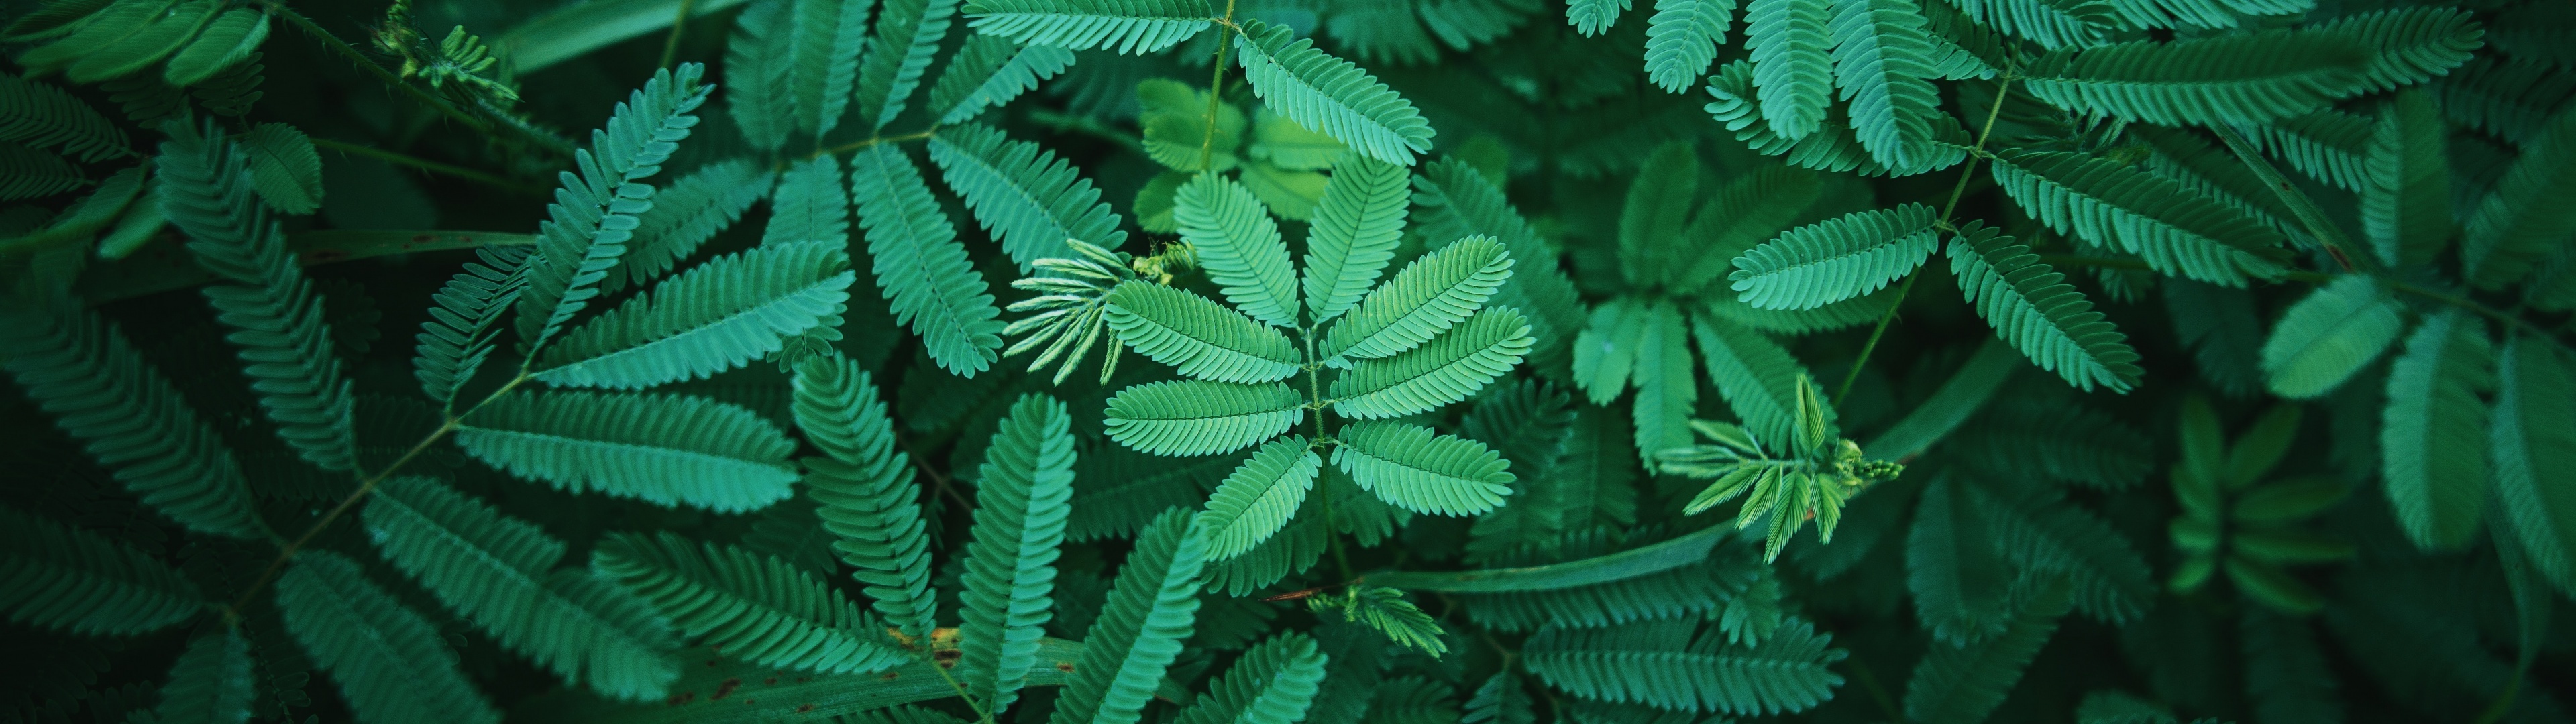 Green Leaf: The circle of the fern tropical vegetation in the jungle forest. 3840x1080 Dual Screen Wallpaper.